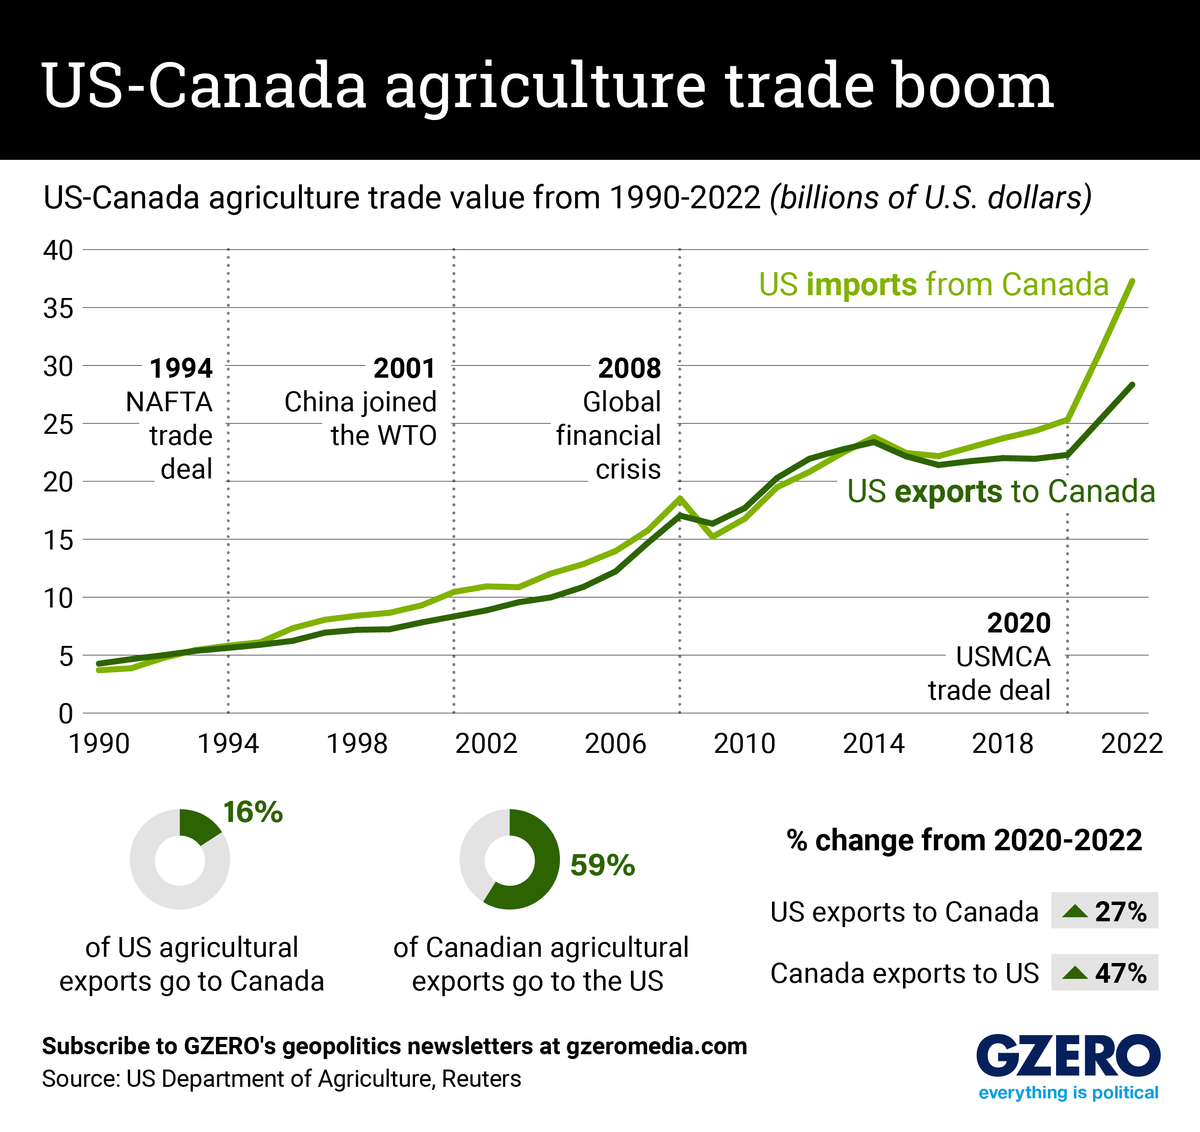 The Graphic Truth: US-Canada agriculture trade boom